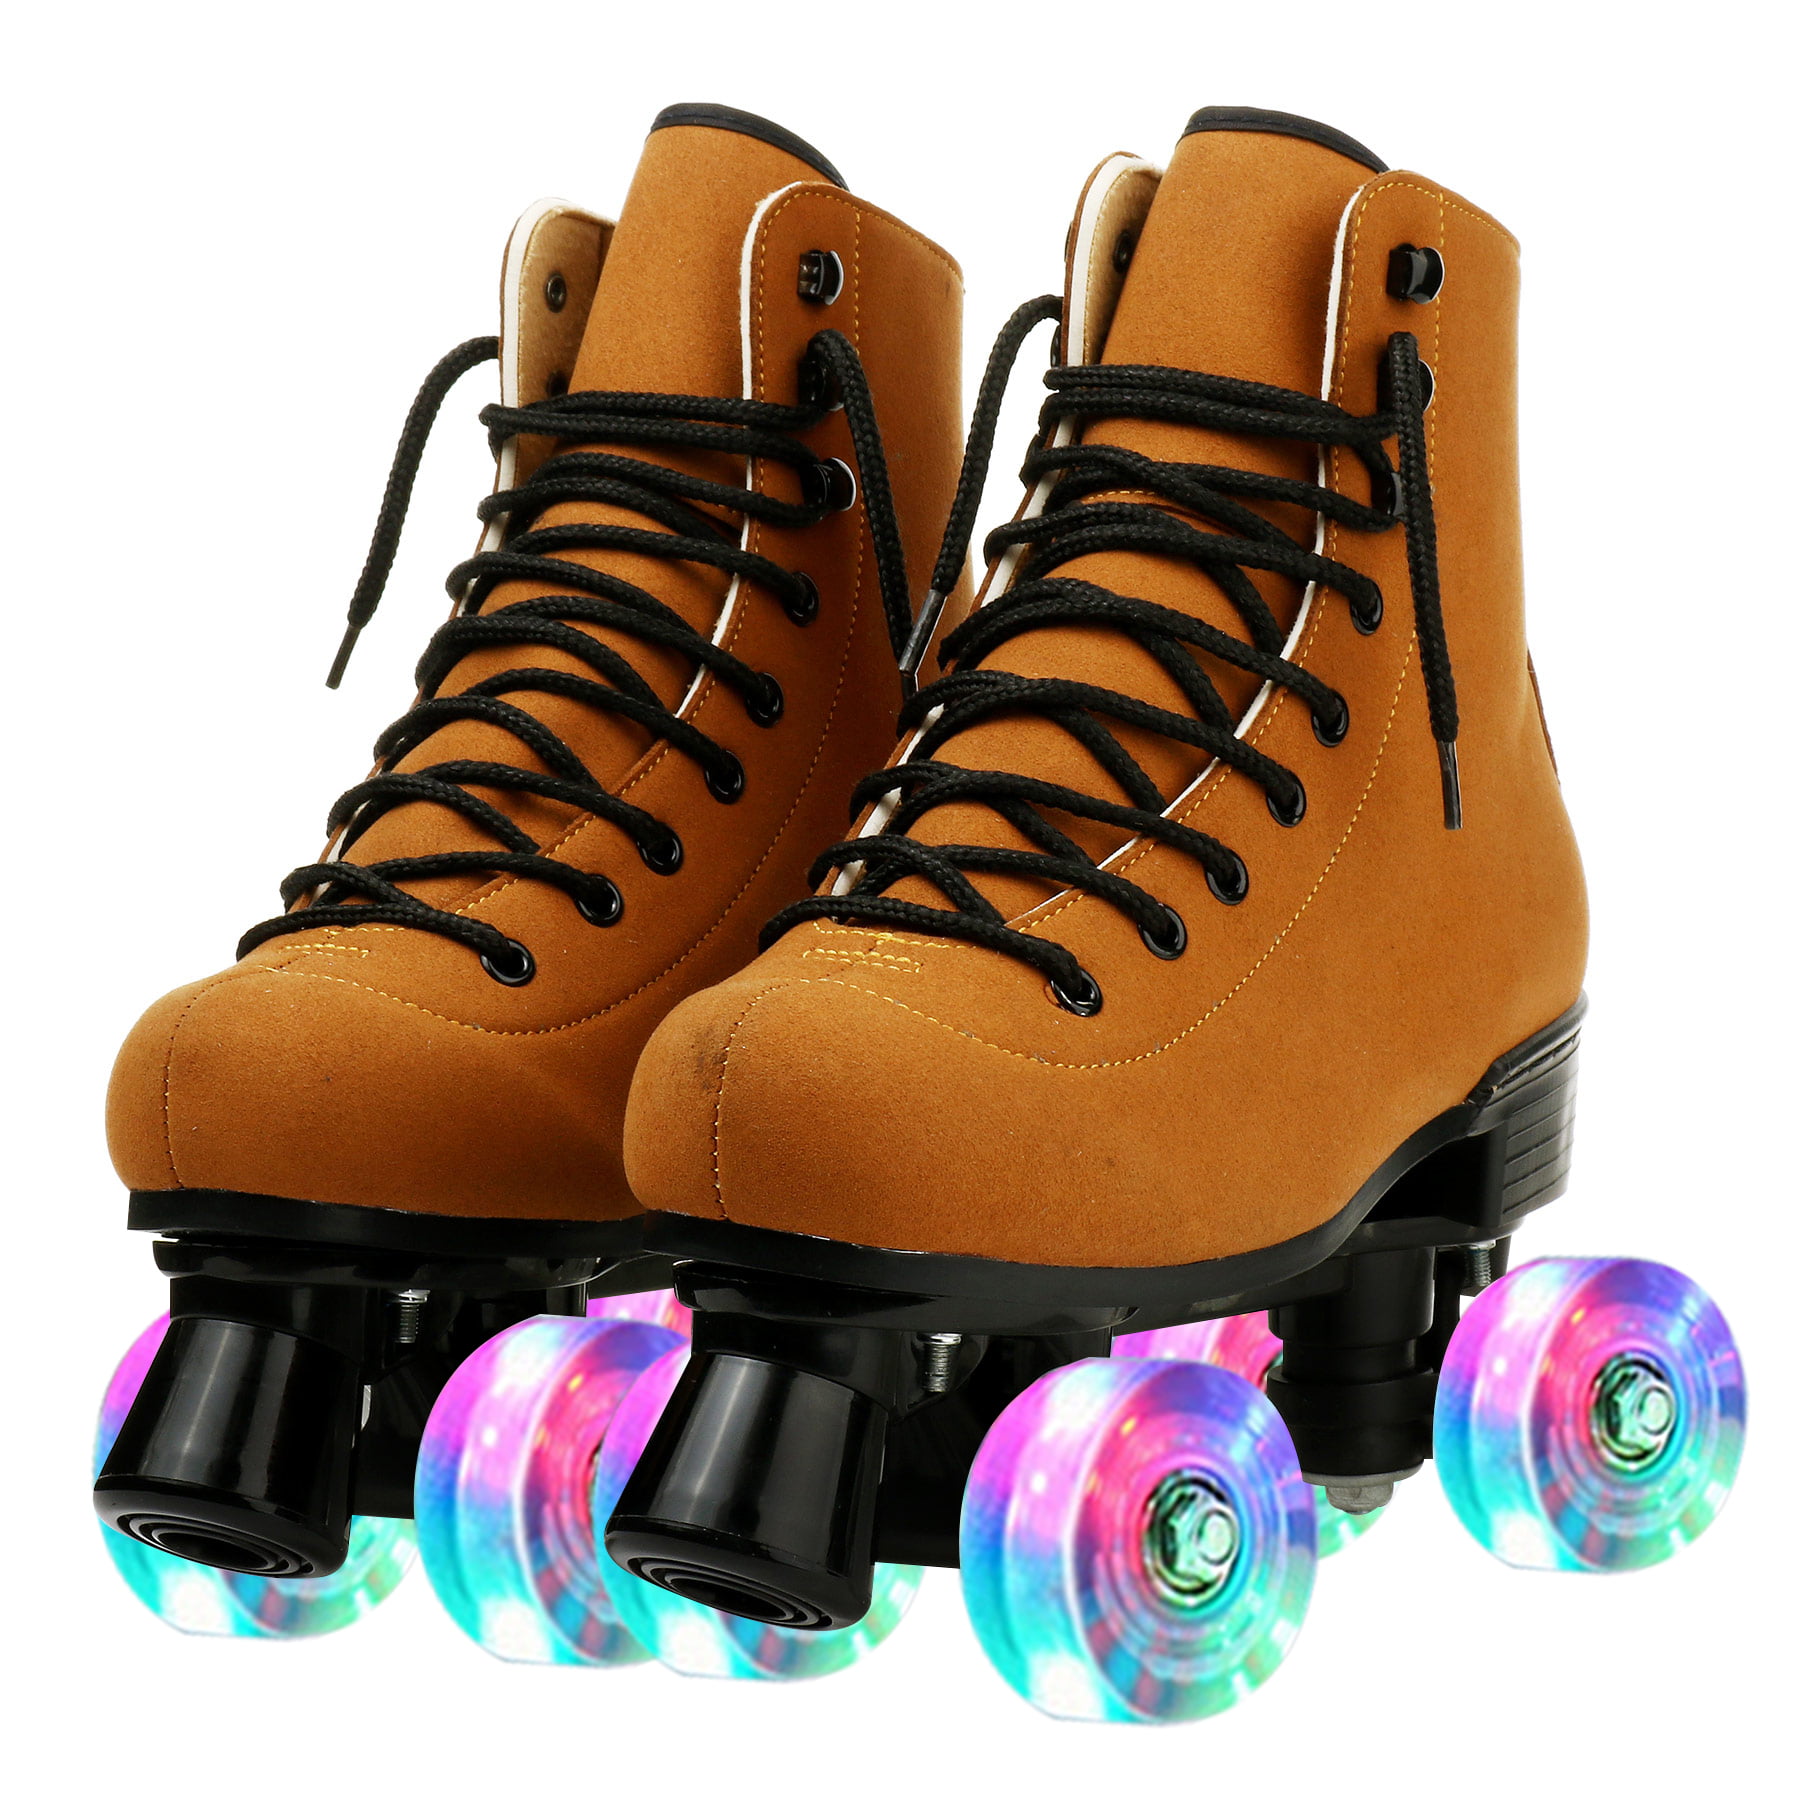 Womens Roller Skates PU Leather High Top Roller Skates 4 Wheel,Shiny Roller Skates for Boy and Girls Classic Roller Skates for Adults